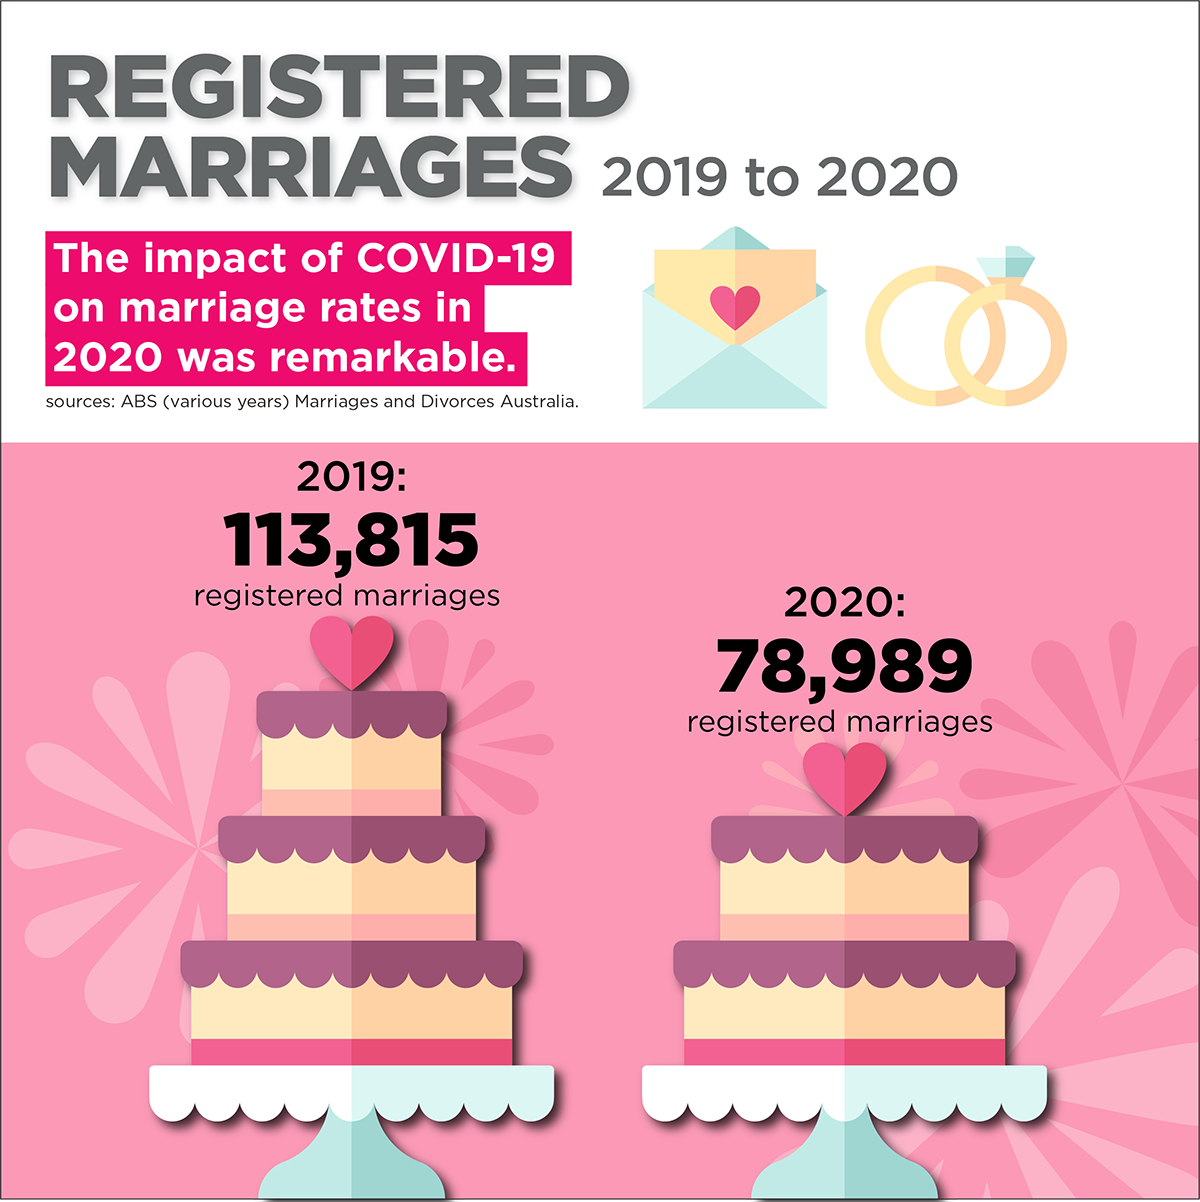 Infographic: Registered marriages 2019-2020. The impact of COVID-19 on marriage rates in 2020 was remarkable. 2020 - 113,815 registered marriages. 2020 - 78,989 registered marriages. Source: ABS (various years) Marriages and Divorces Australia.